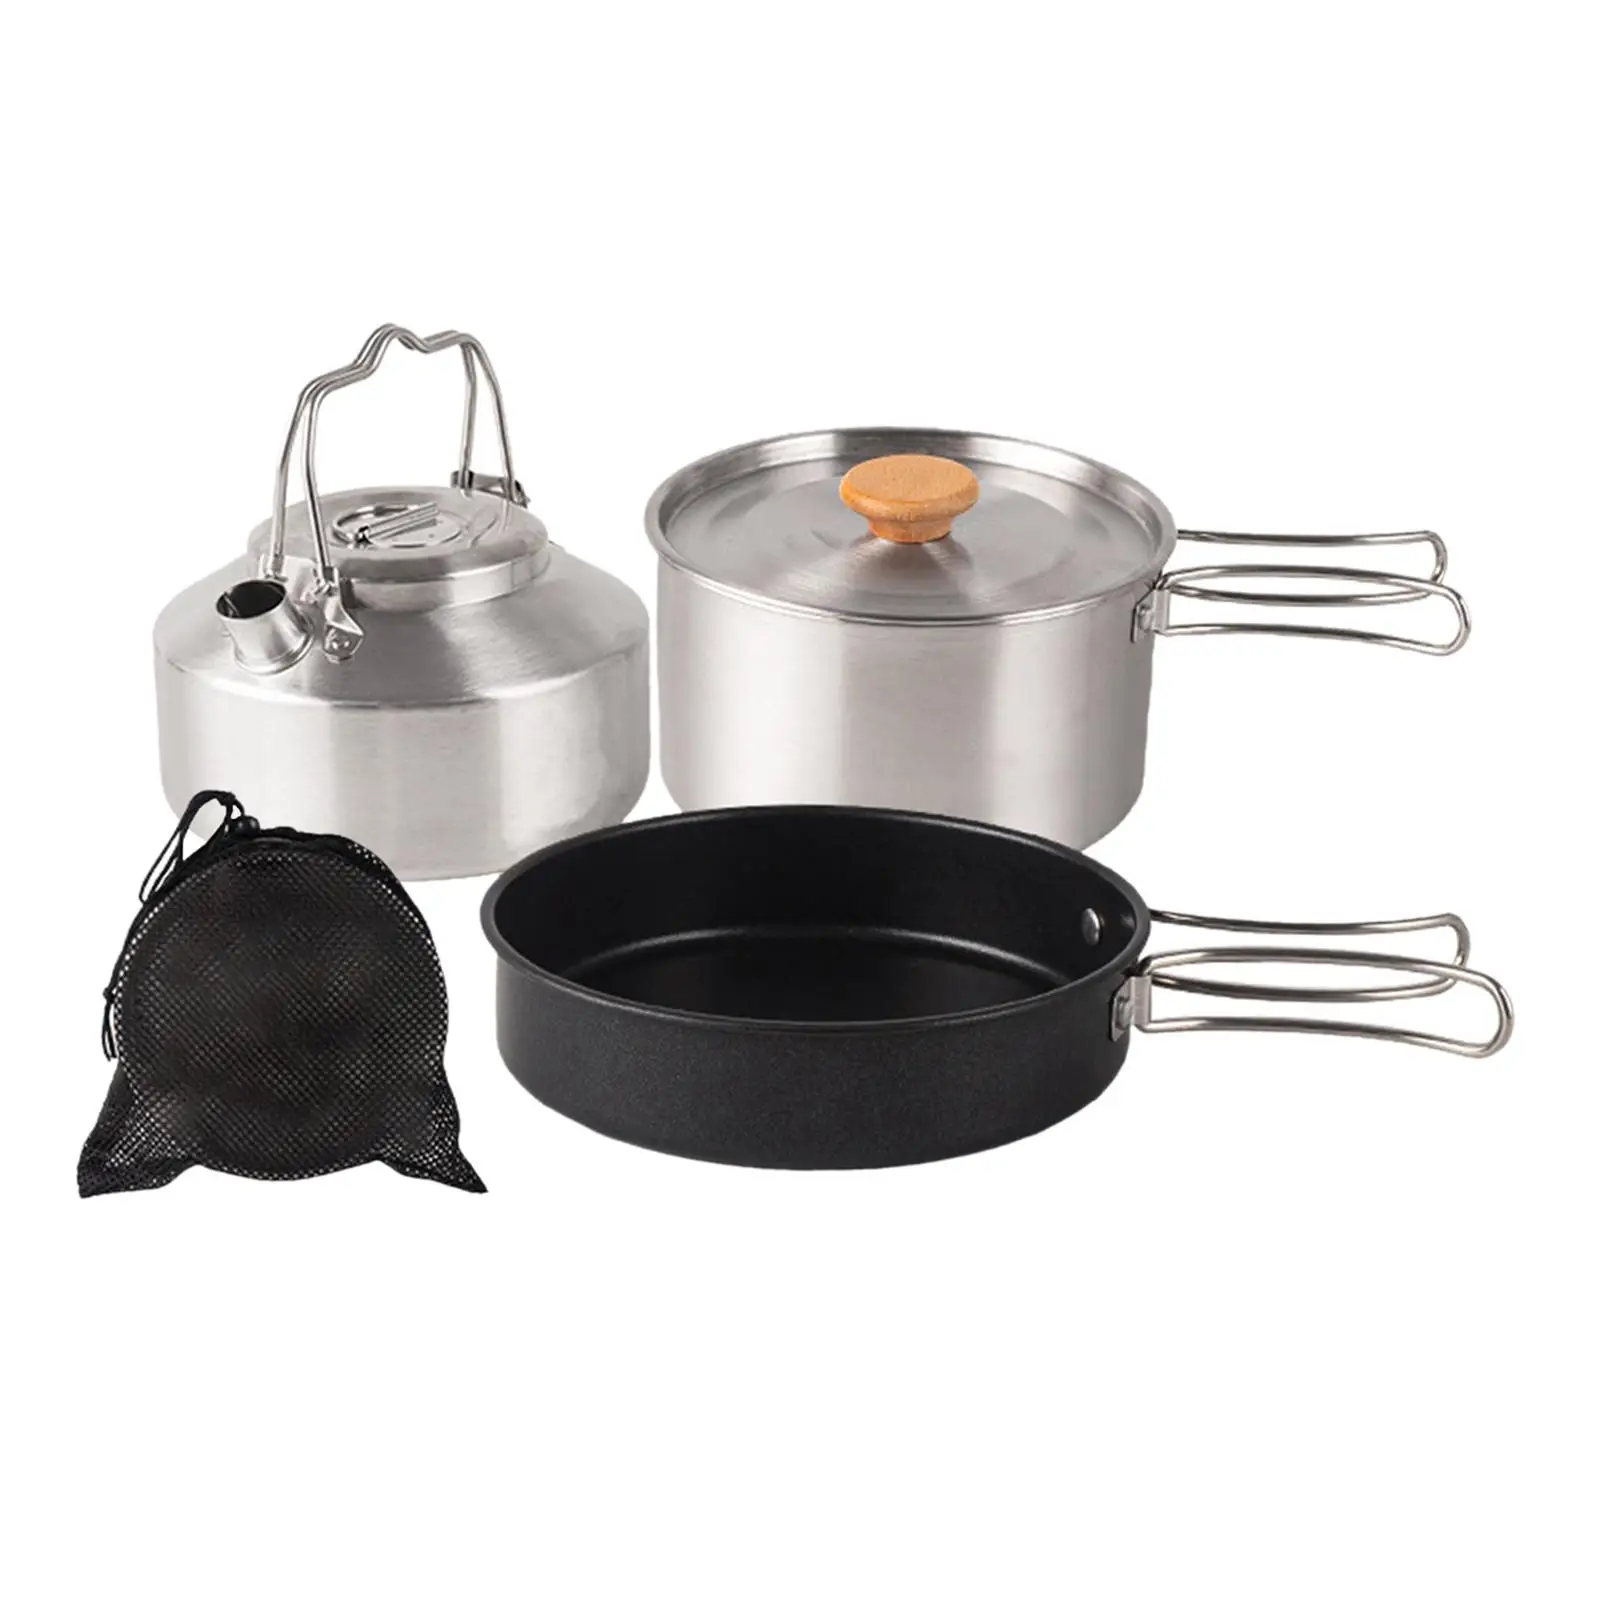 Camping Cookware Set Camping and Kettle for Backpacking BBQ Fishing